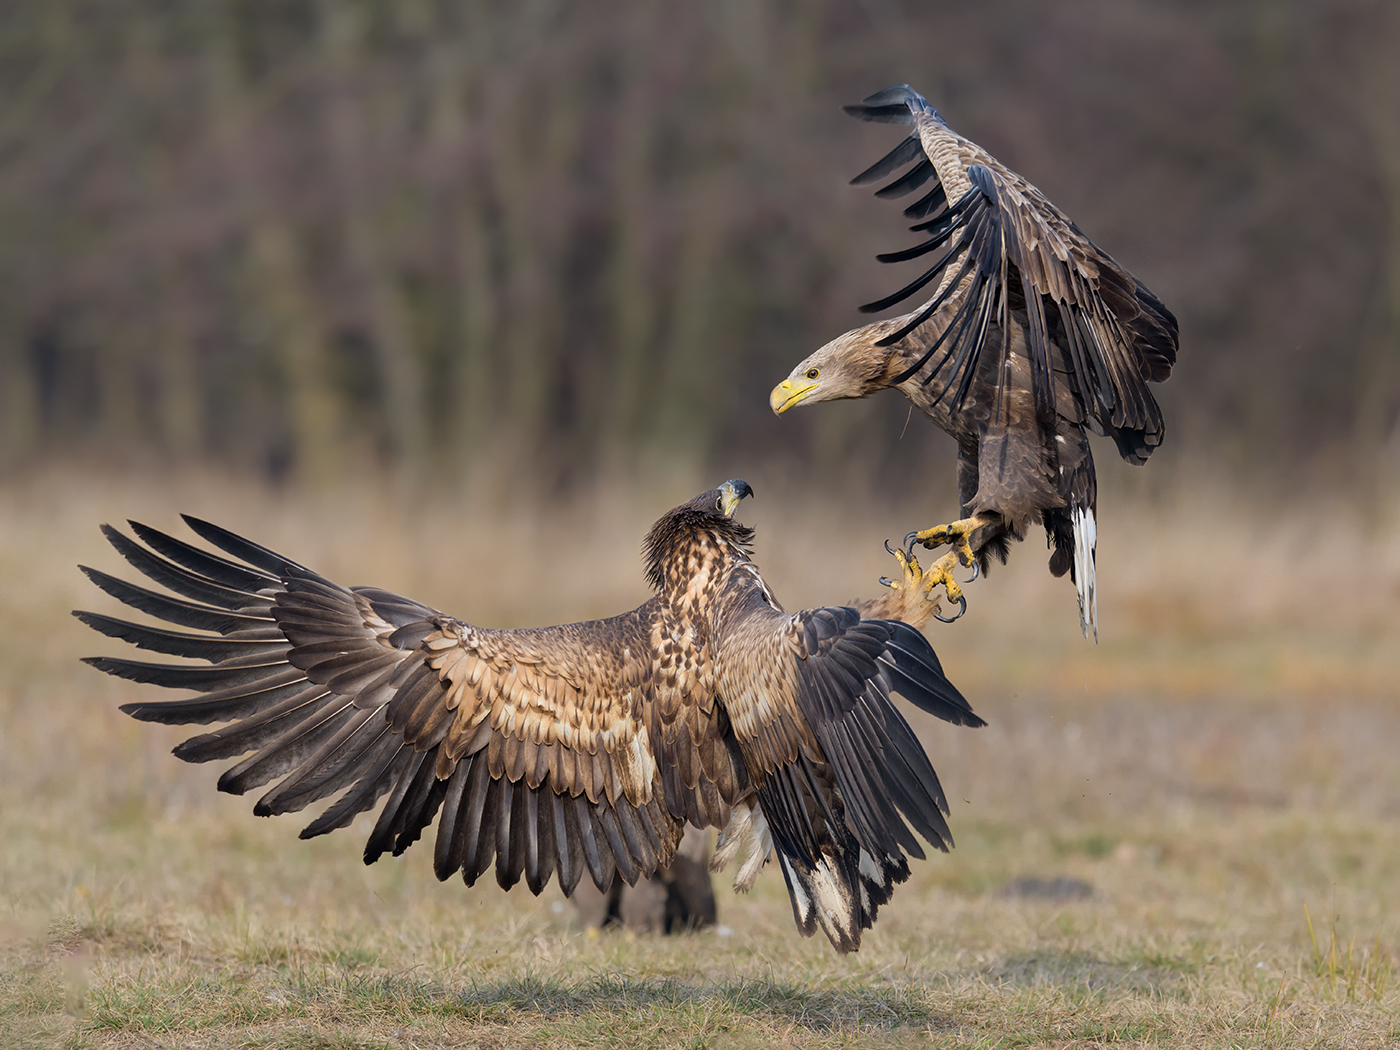 White Tailed Eagle Confrontation  By Steve Gresty